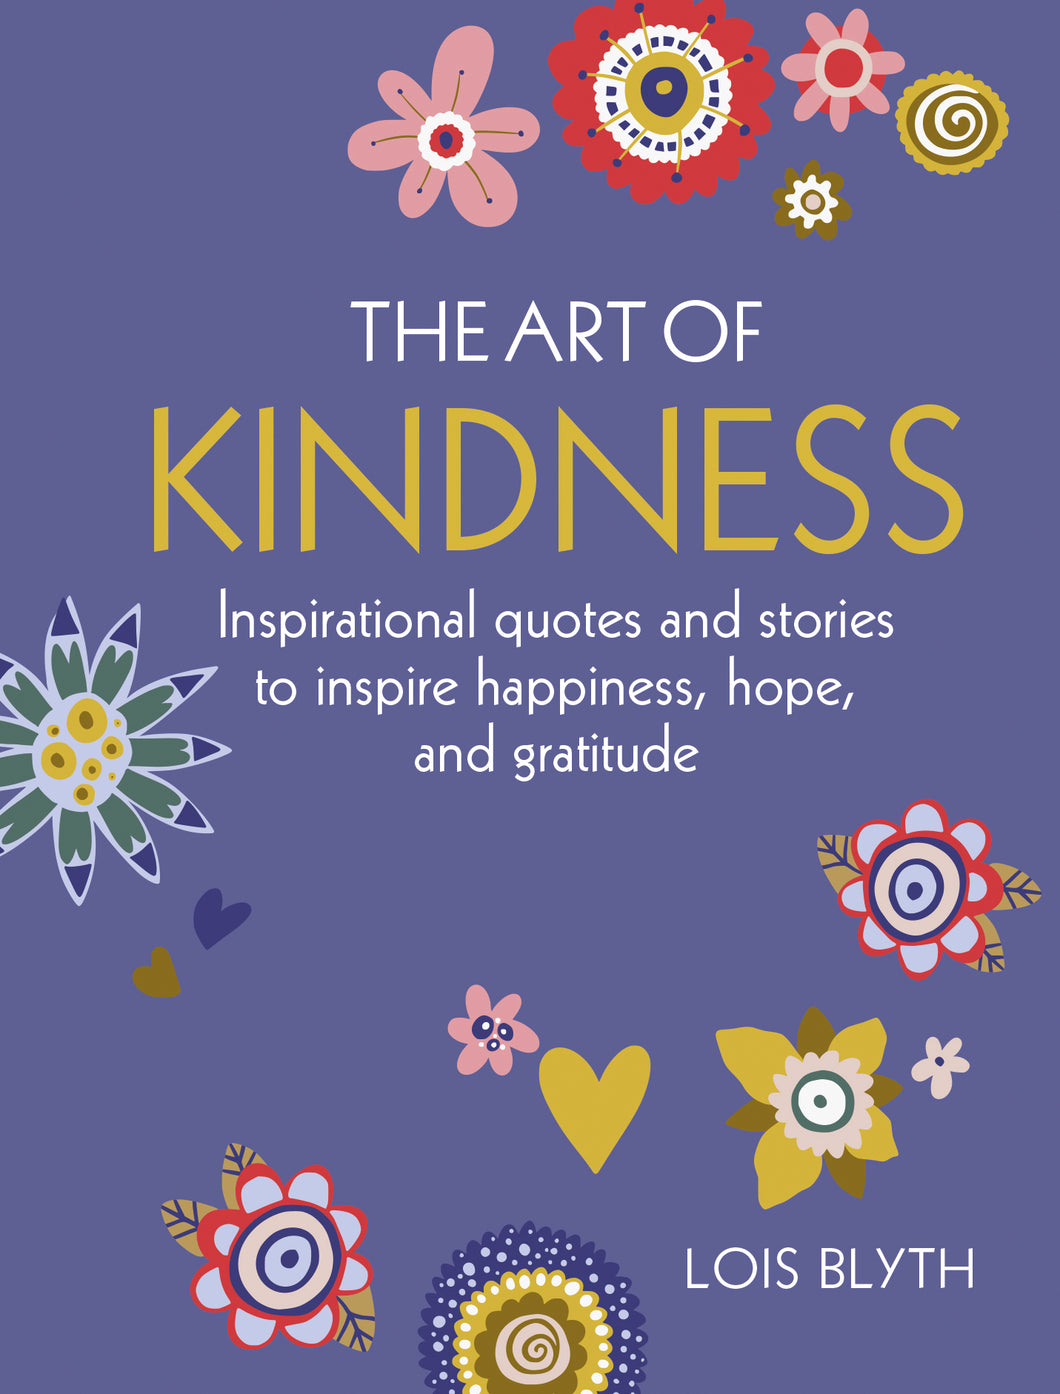 The Art of Kindness